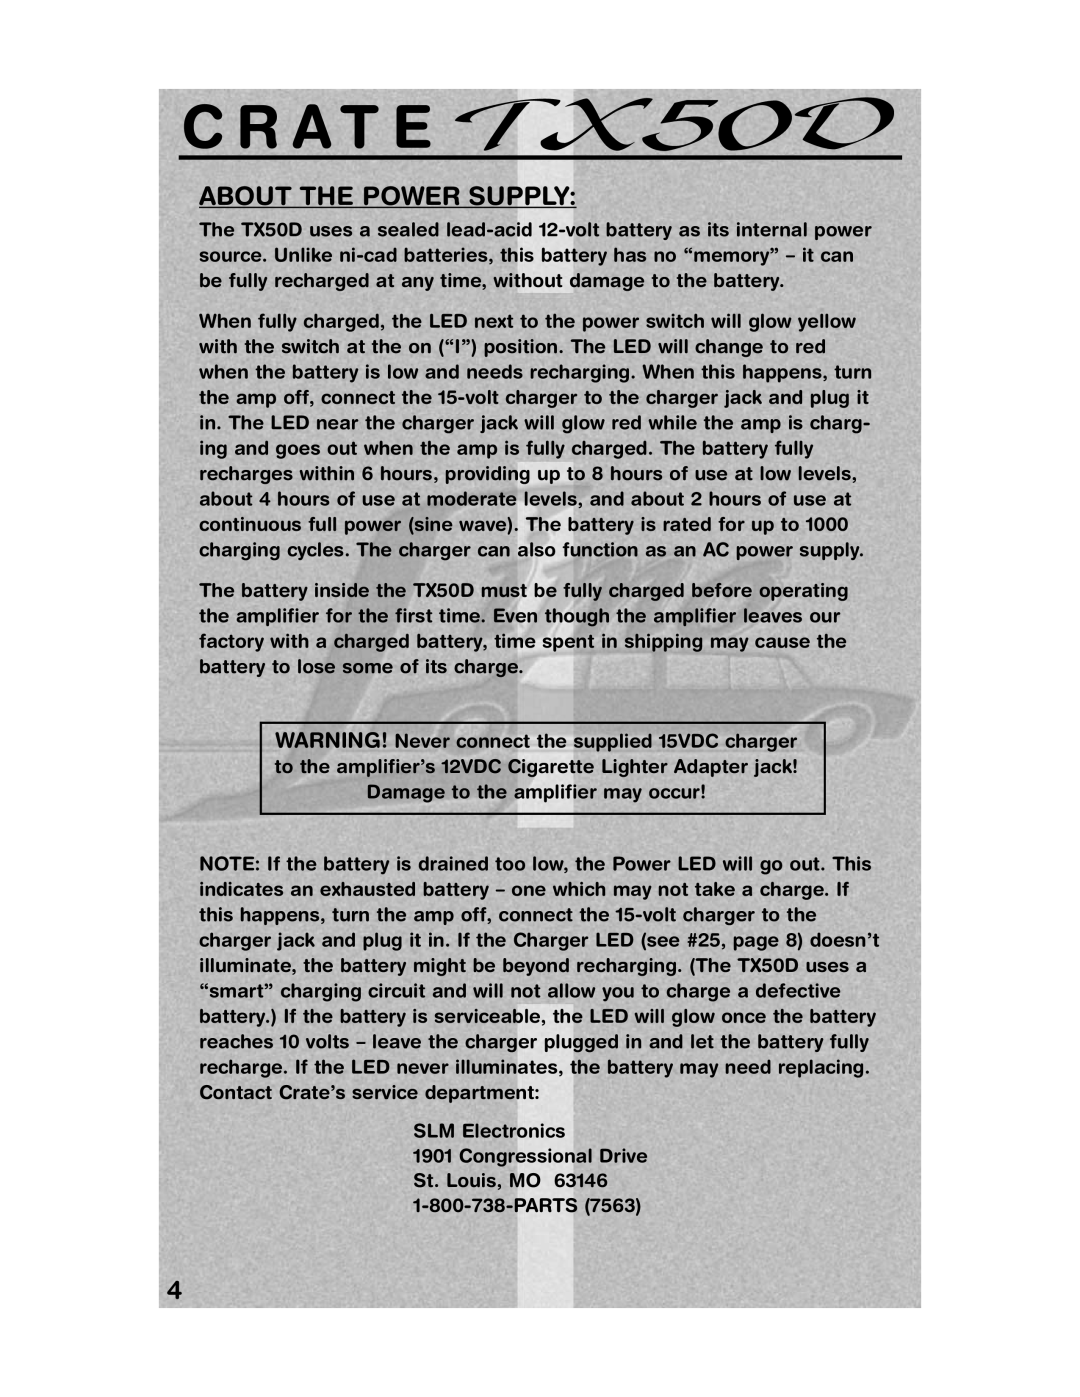 Crate Amplifiers TX50D manual About The Power Supply, C R A T E 